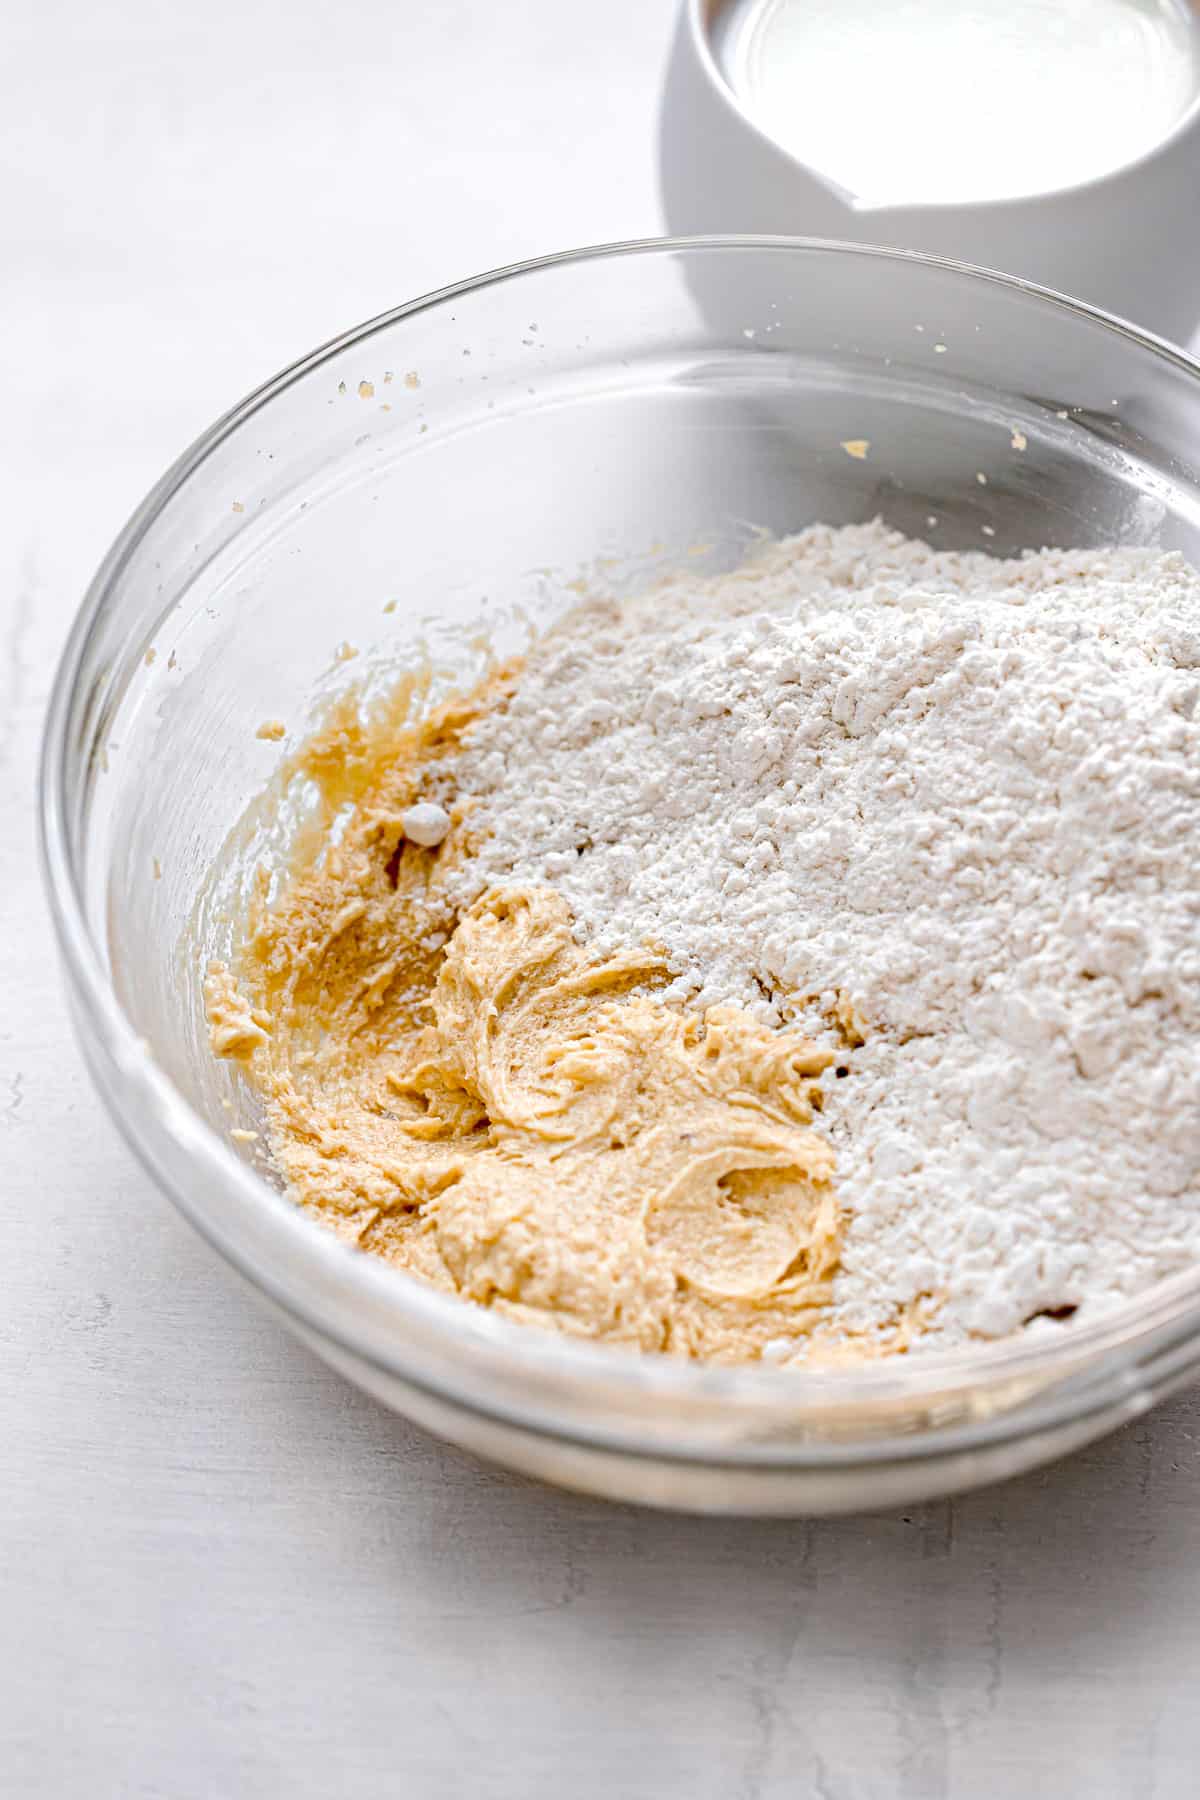 dry ingredients added to batter in glass bowl.